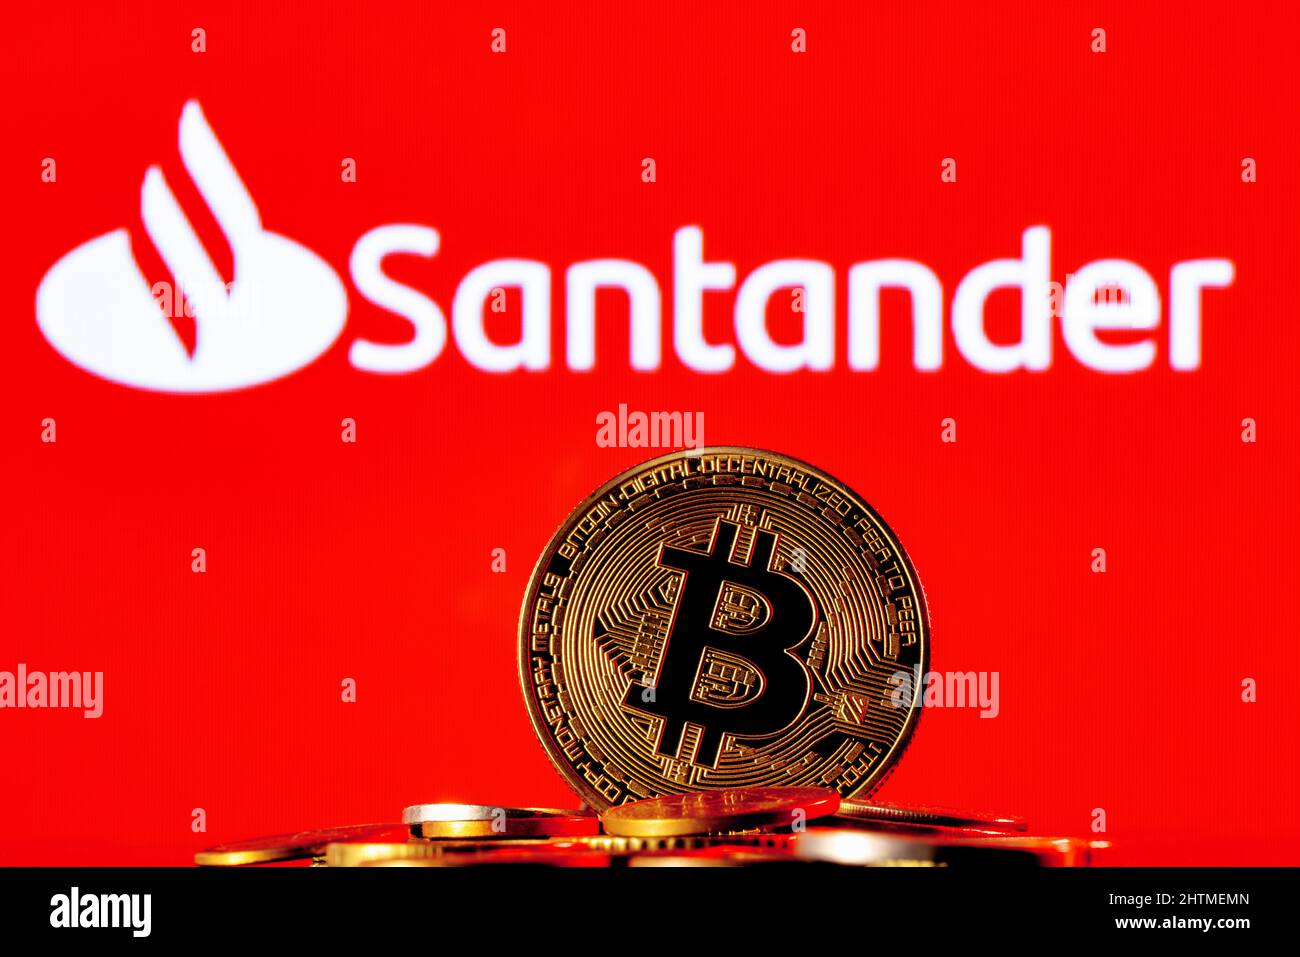 Golden bitcoin in pile of coins on background of Credit Suisse bank logo Stock Photo